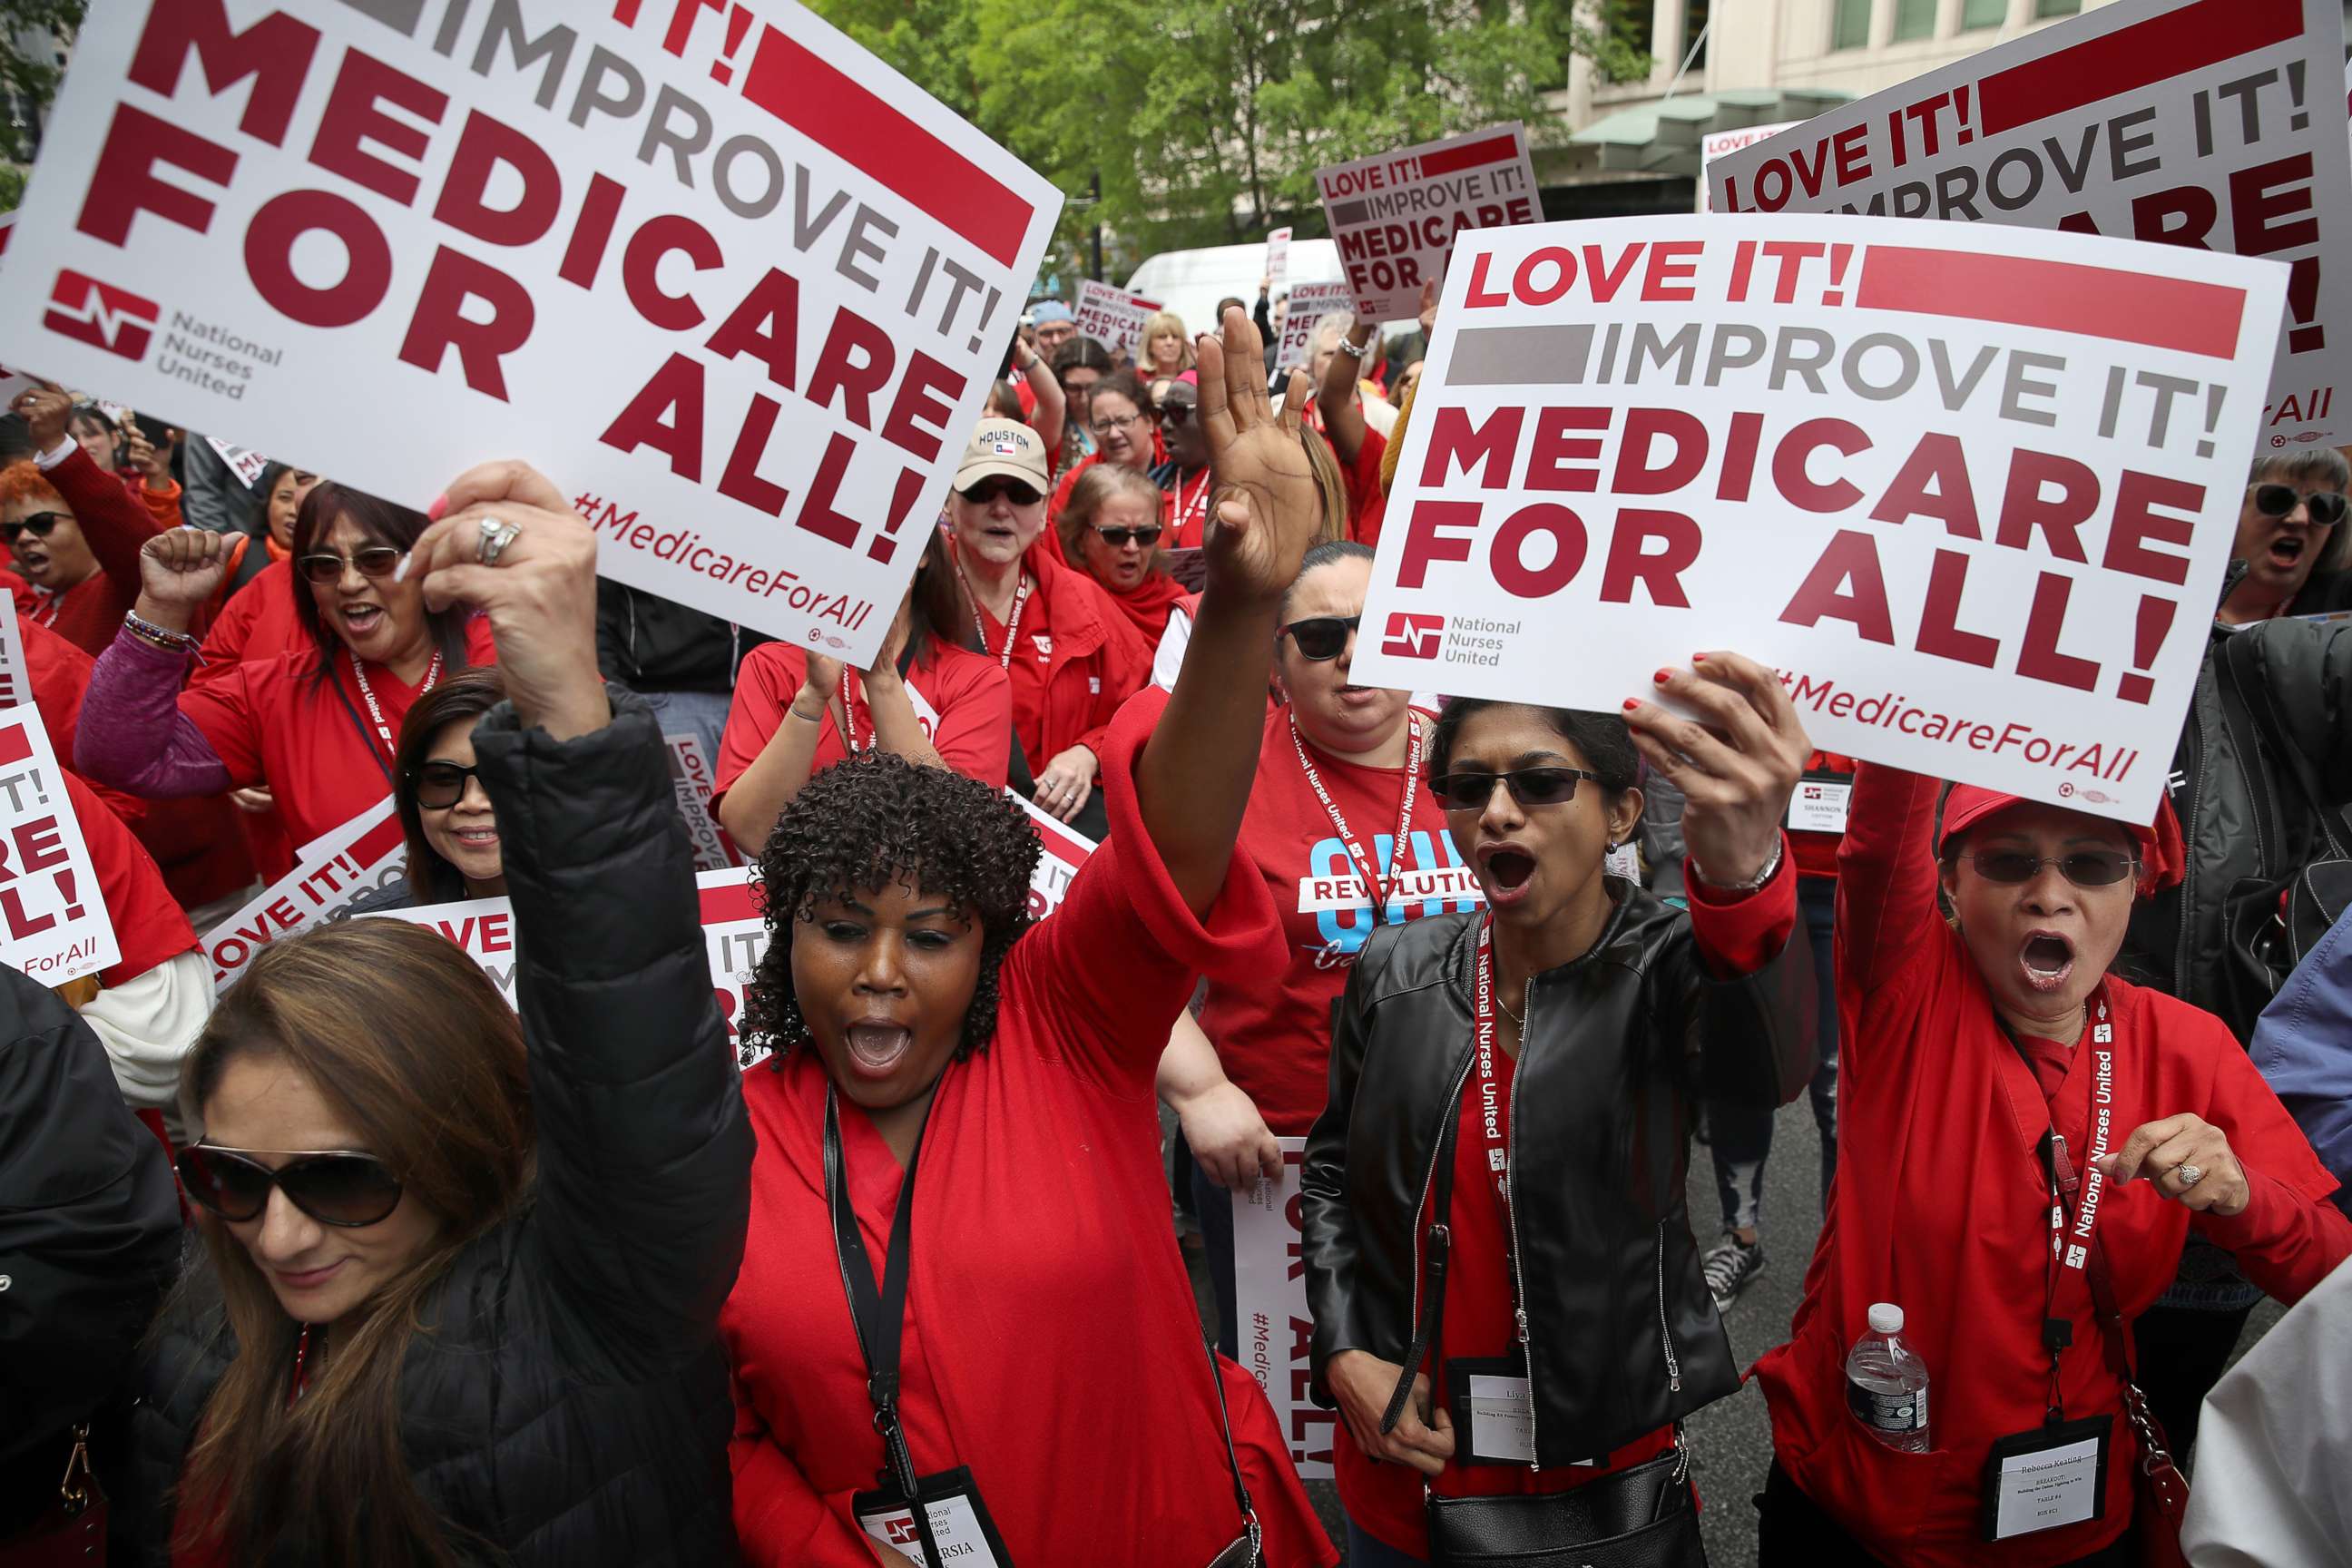 PHOTO: Protesters supporting Medicare for All hold a rally outside PhRMA headquarters April 29, 2019 in Washington, D.C.